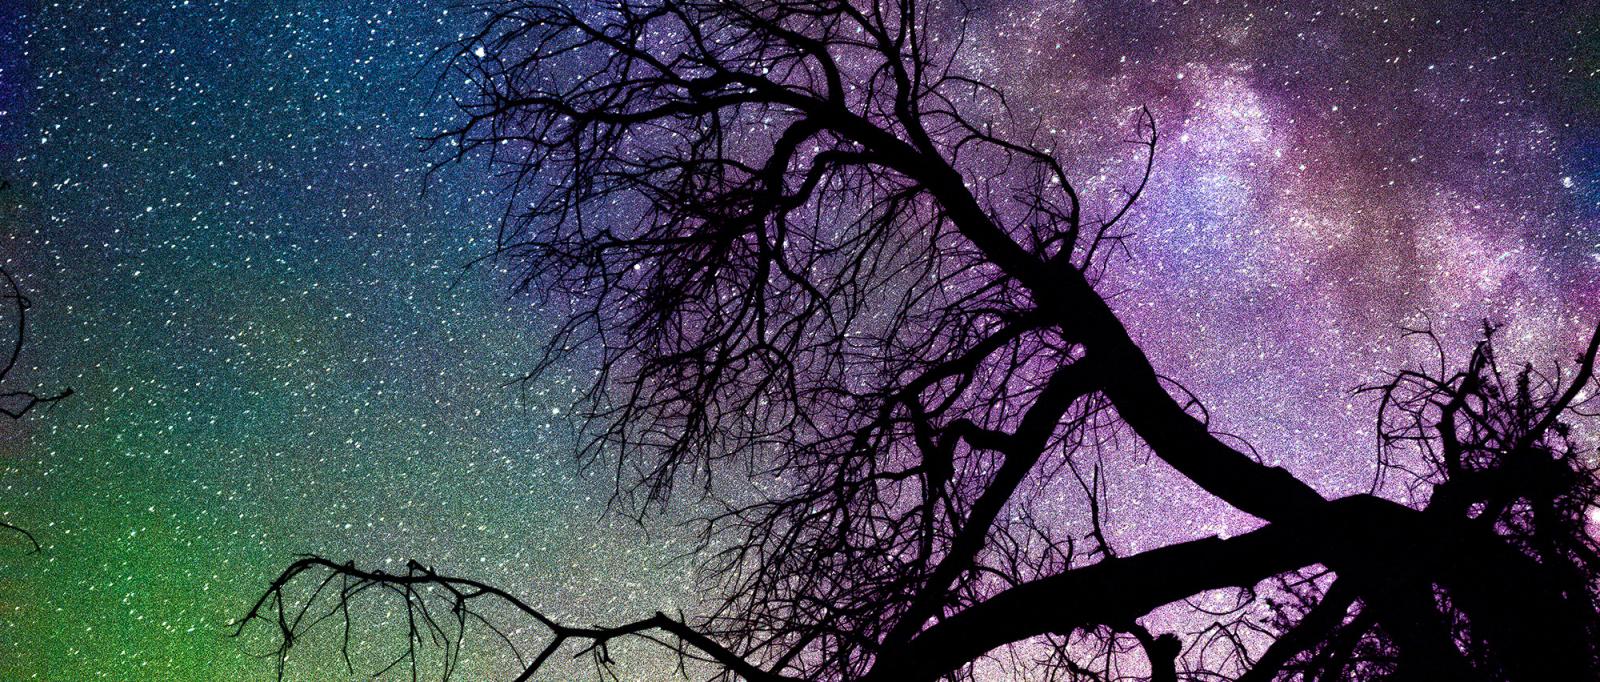 Greens, deep blues and purples of the night sky shine behind branches of a crooked tree